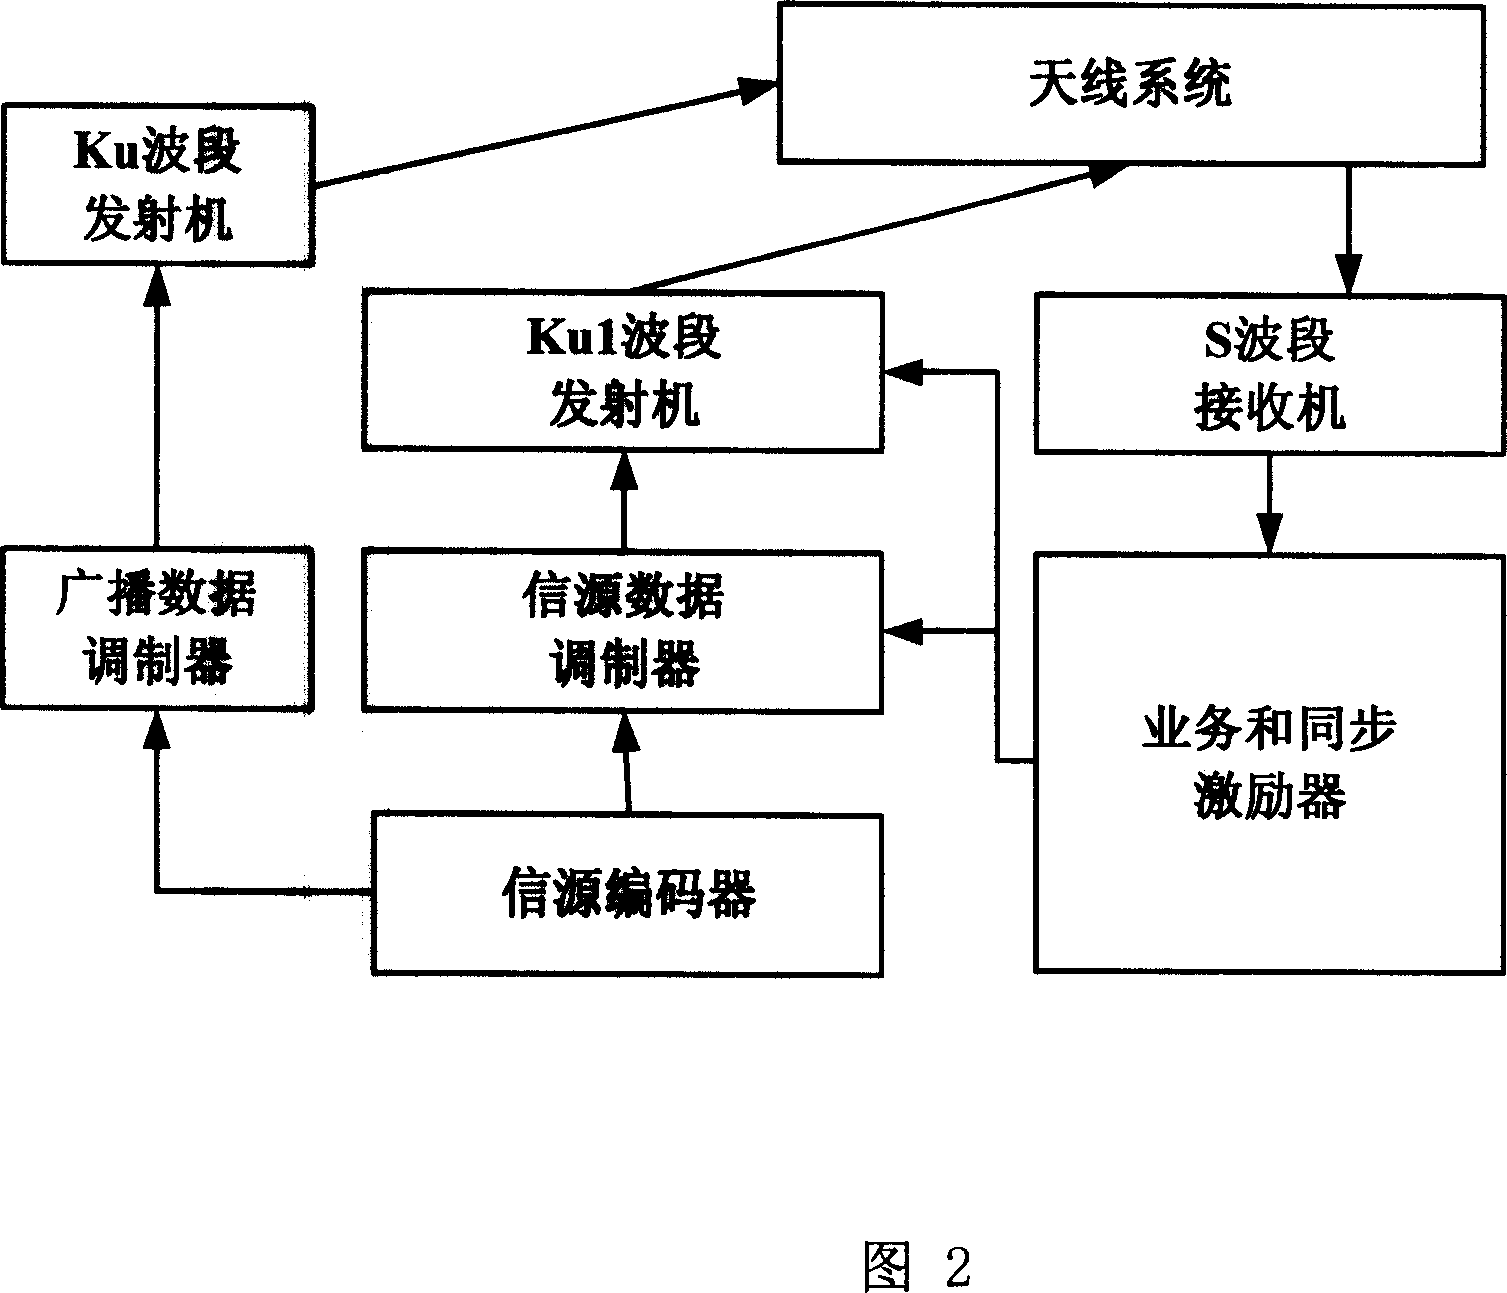 System and method for synchronizing broadcast frequency and system time of digital single-frequency broadcasting network